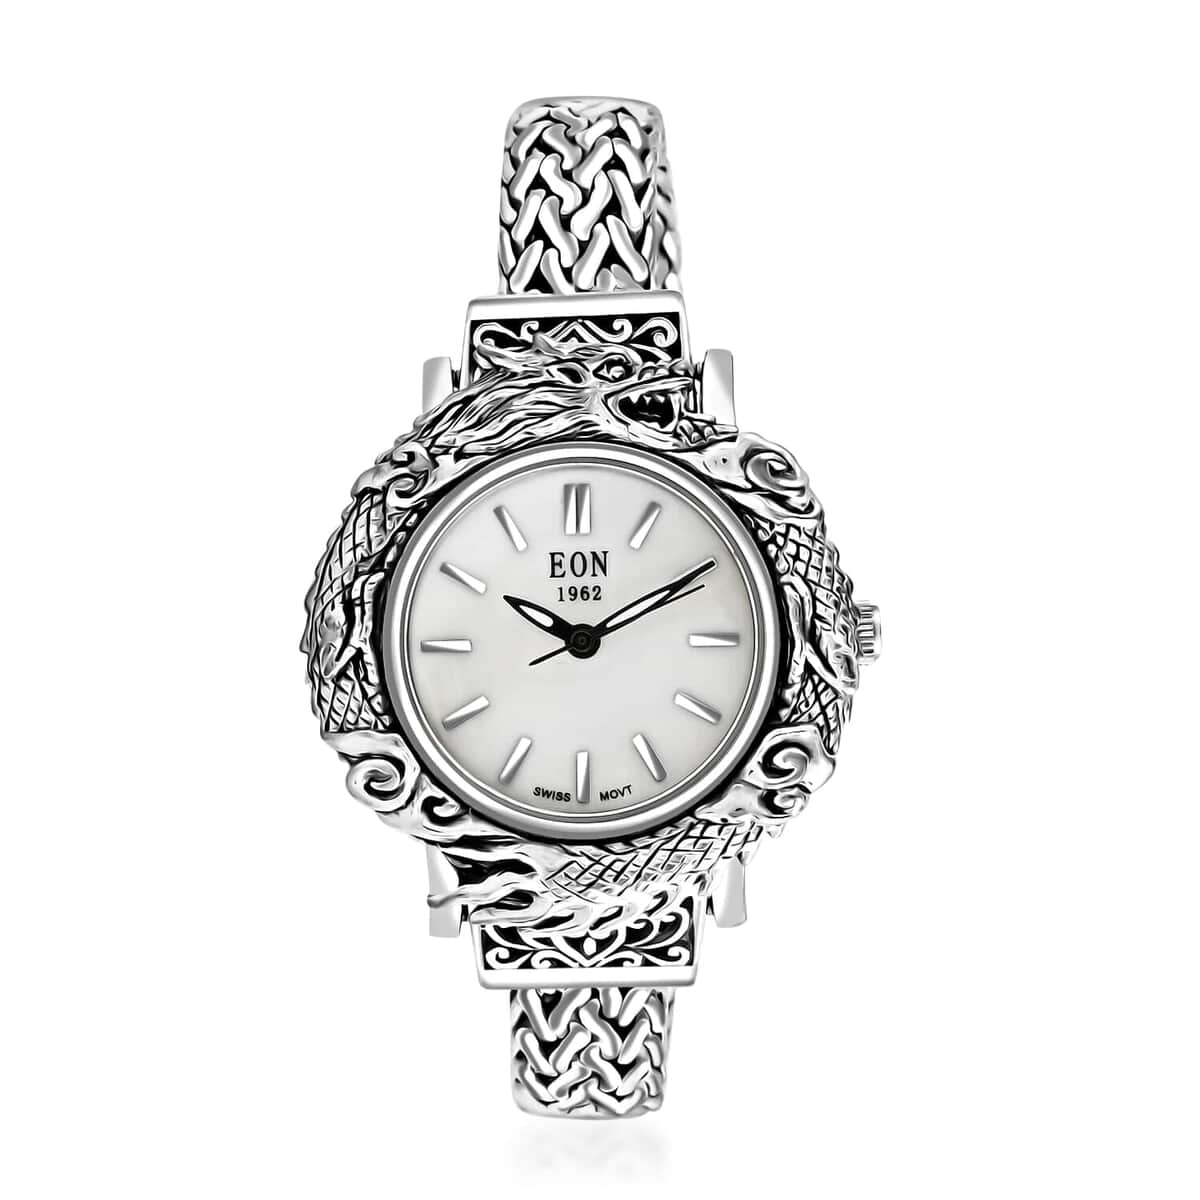 Bali Legacy Eon 1962 Swiss Movement MOP Dial Dragon Case Bracelet Watch in Sterling Silver (7.50 in), Vintage Casual Bracelet Watch, Best Everyday Luxury Minimal Women's Watch, Analogue Watches image number 0